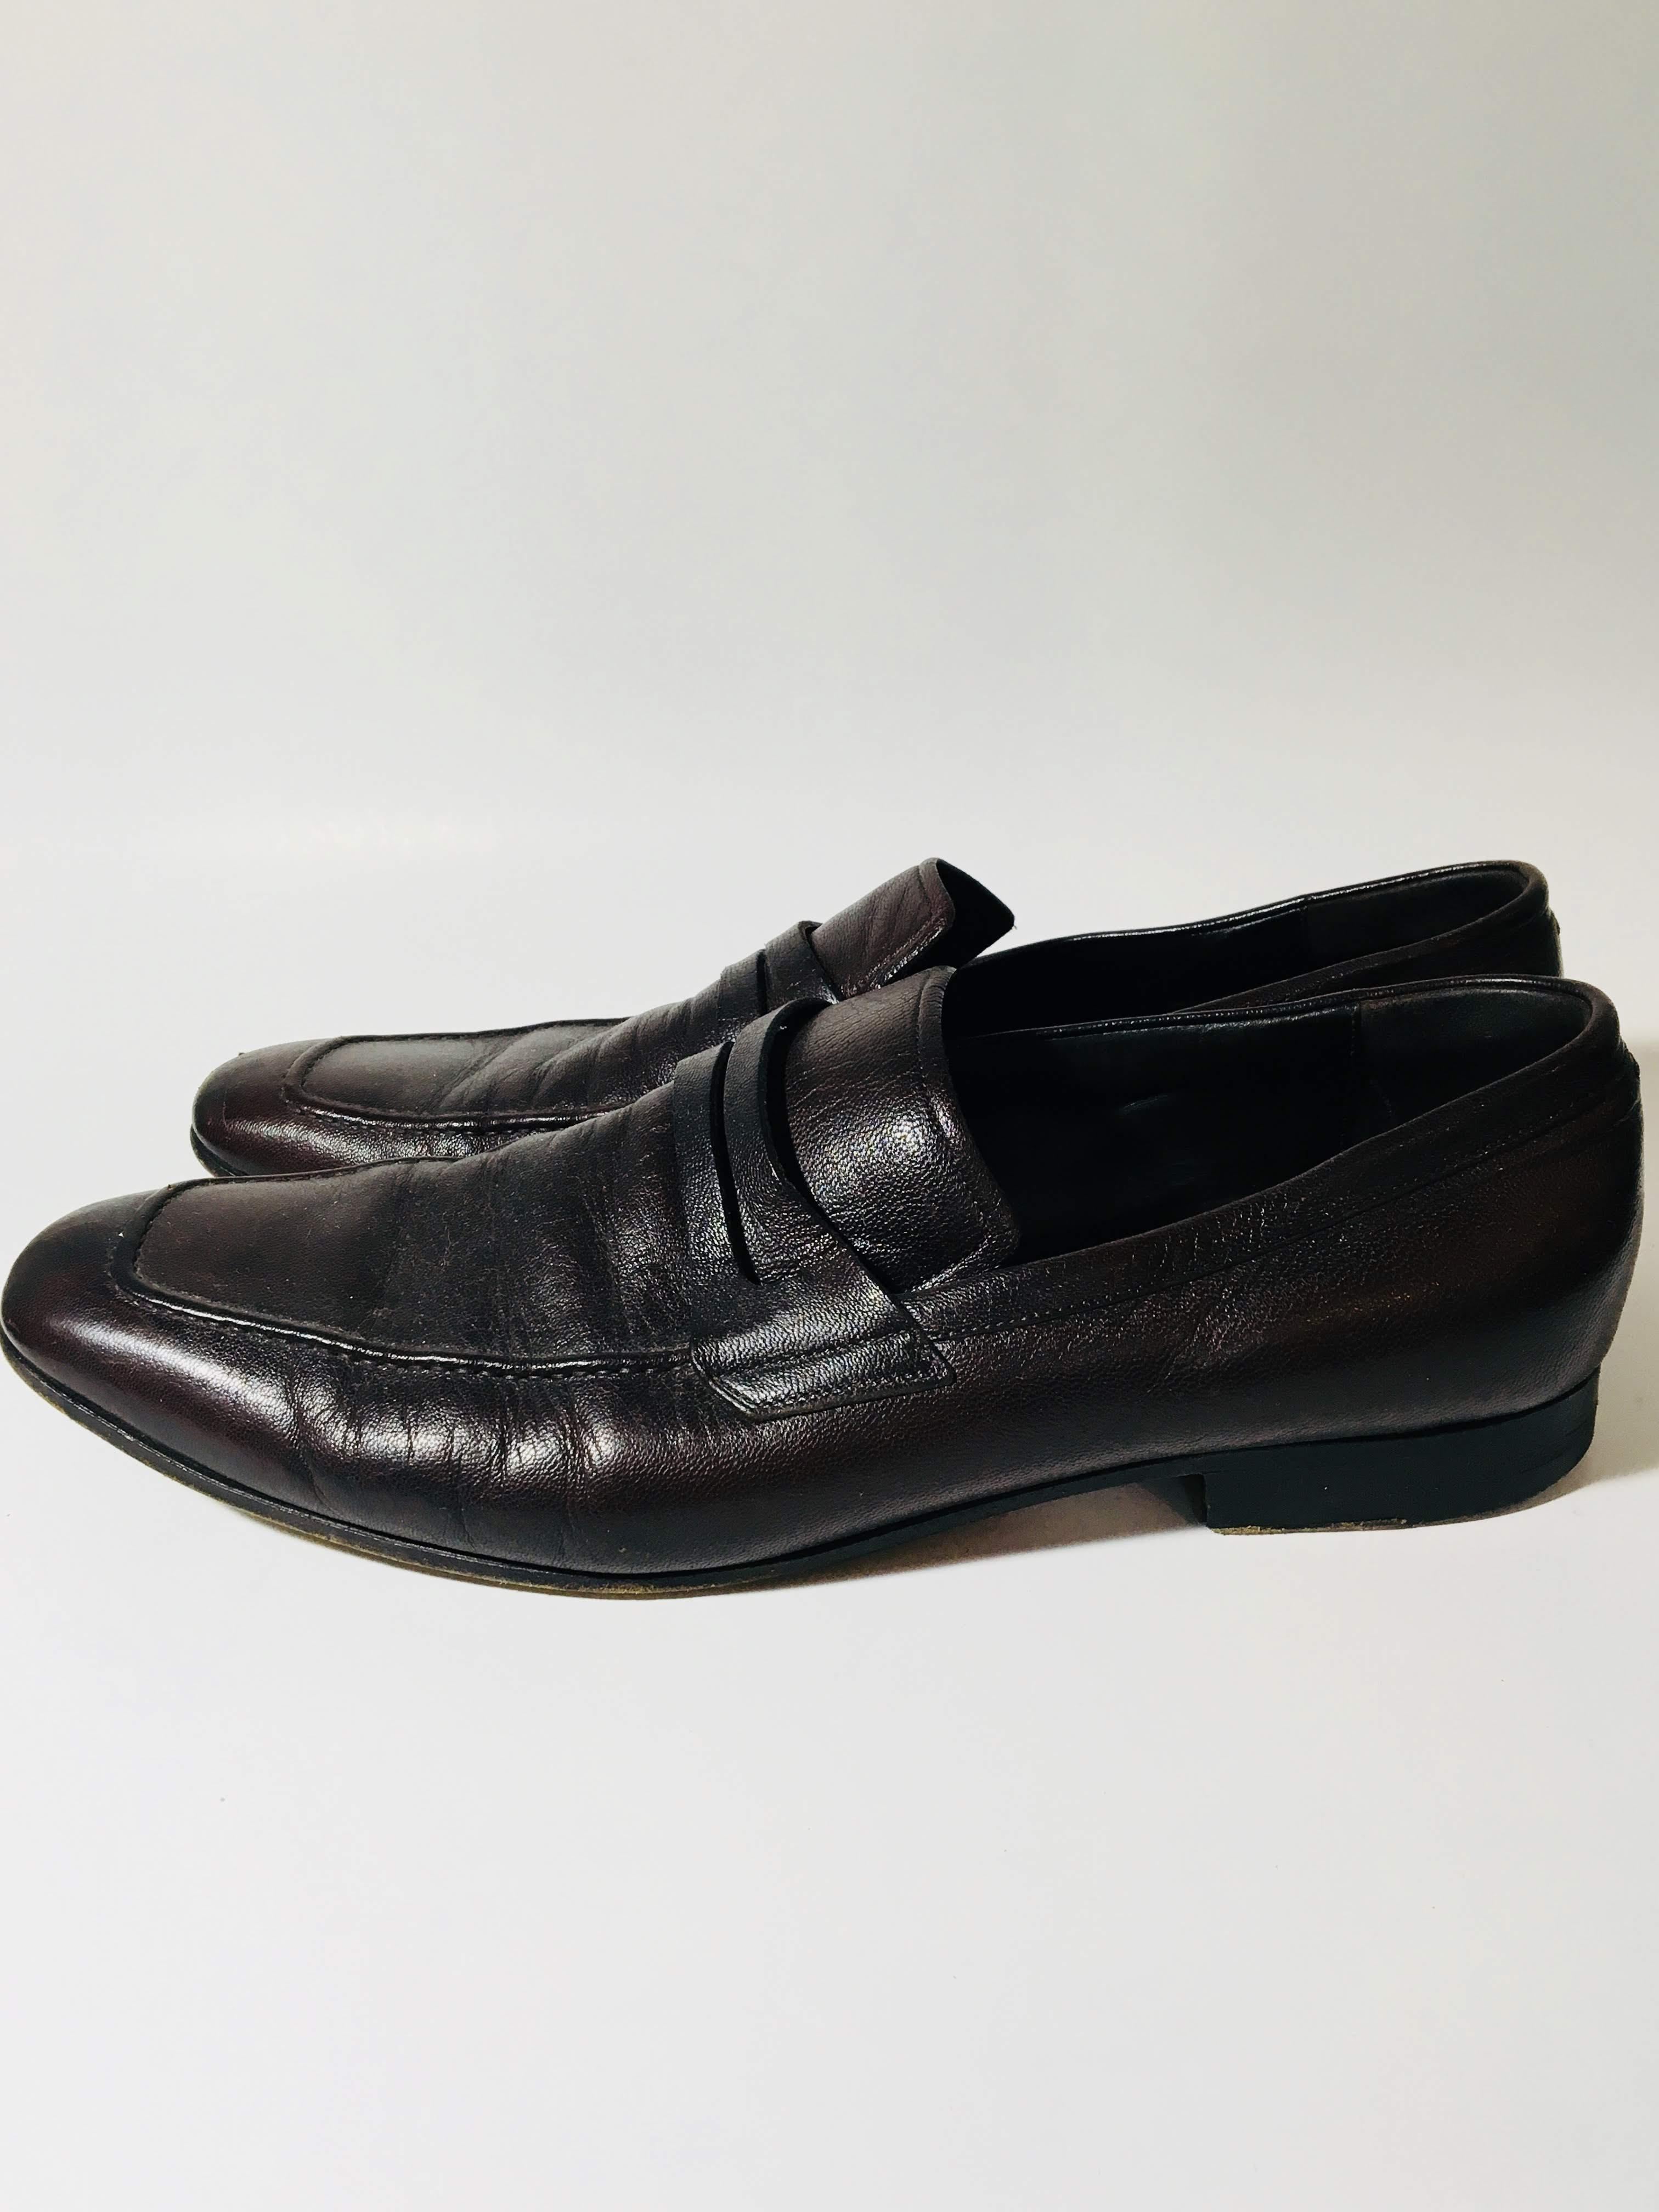 Black Mens Gucci Loafers